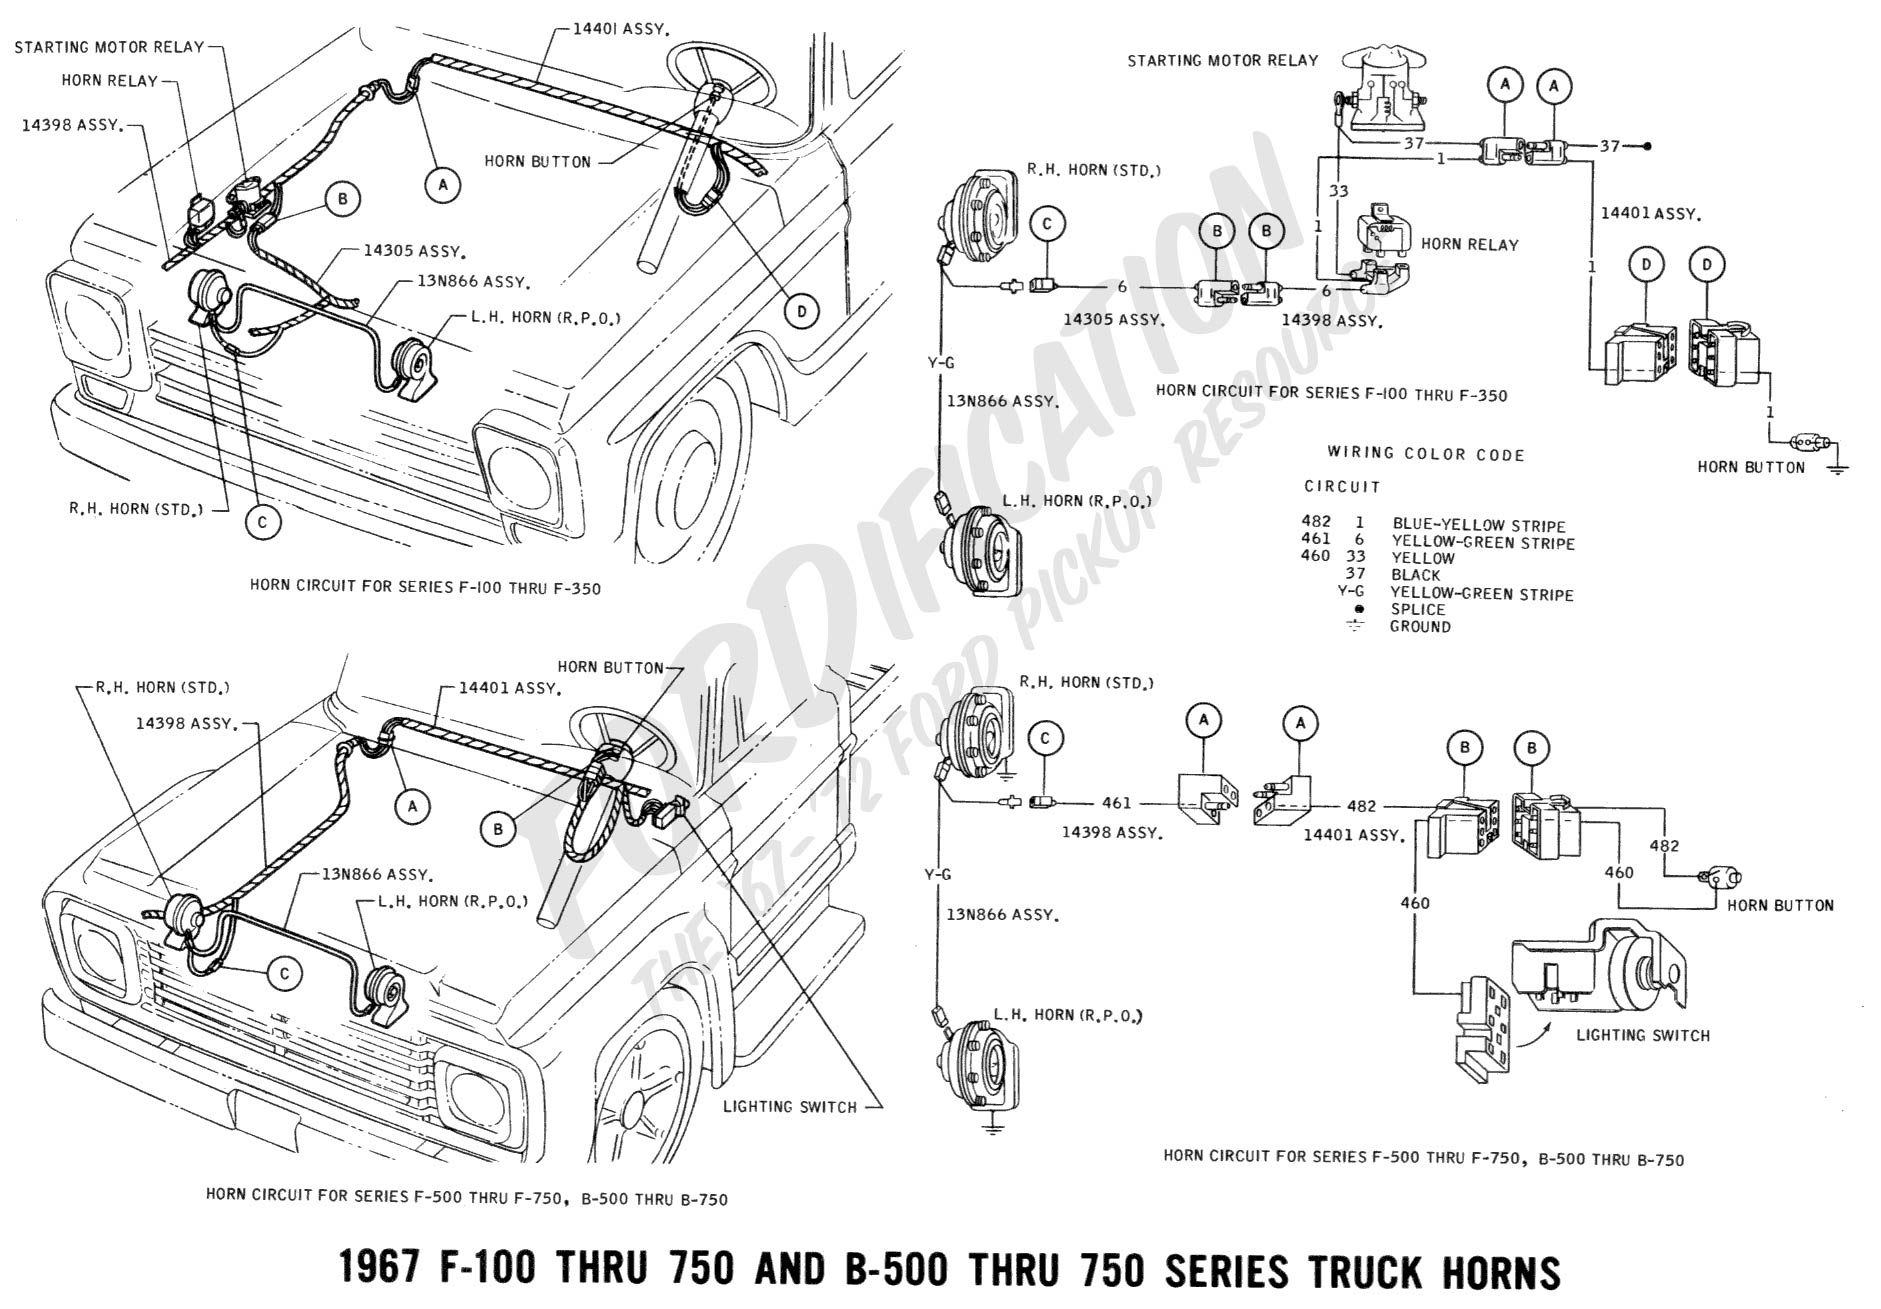 1967 F100 Wiring Diagrams - Wiring Diagrams - Chevy 350 Ignition Coil Wiring Diagram